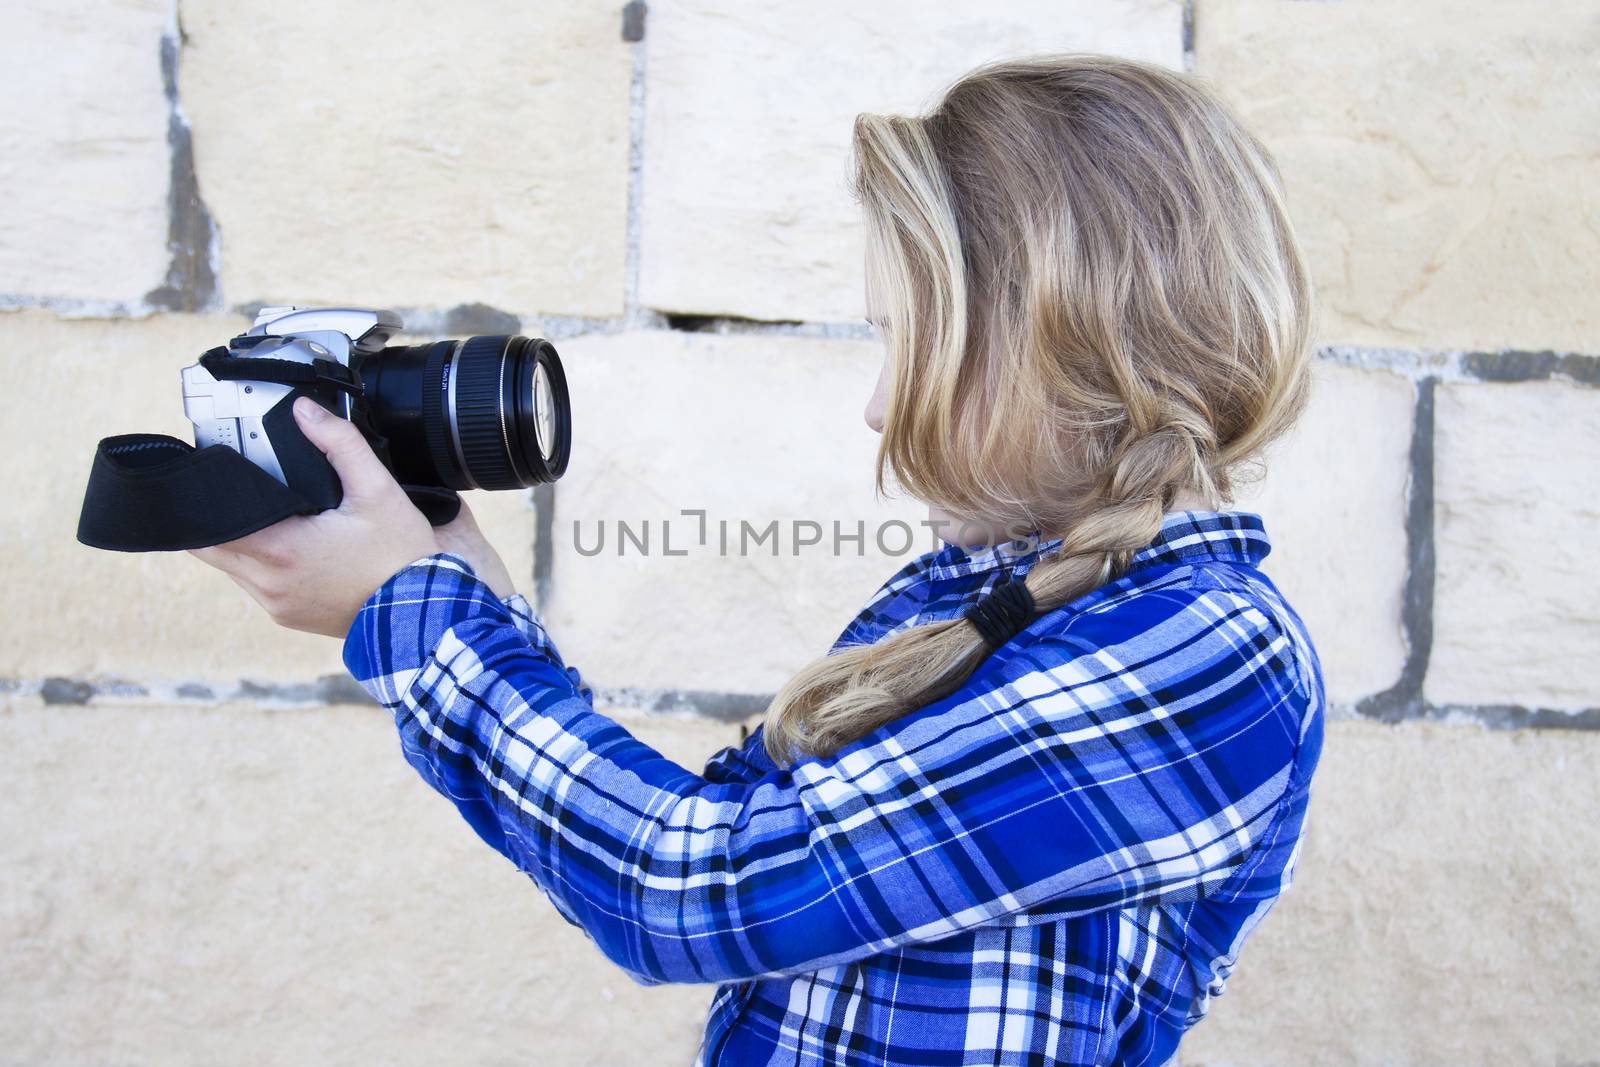 Young teenager holding up a digital SLR camera, snapping a shot of herself, in front of an old rubble wall outside